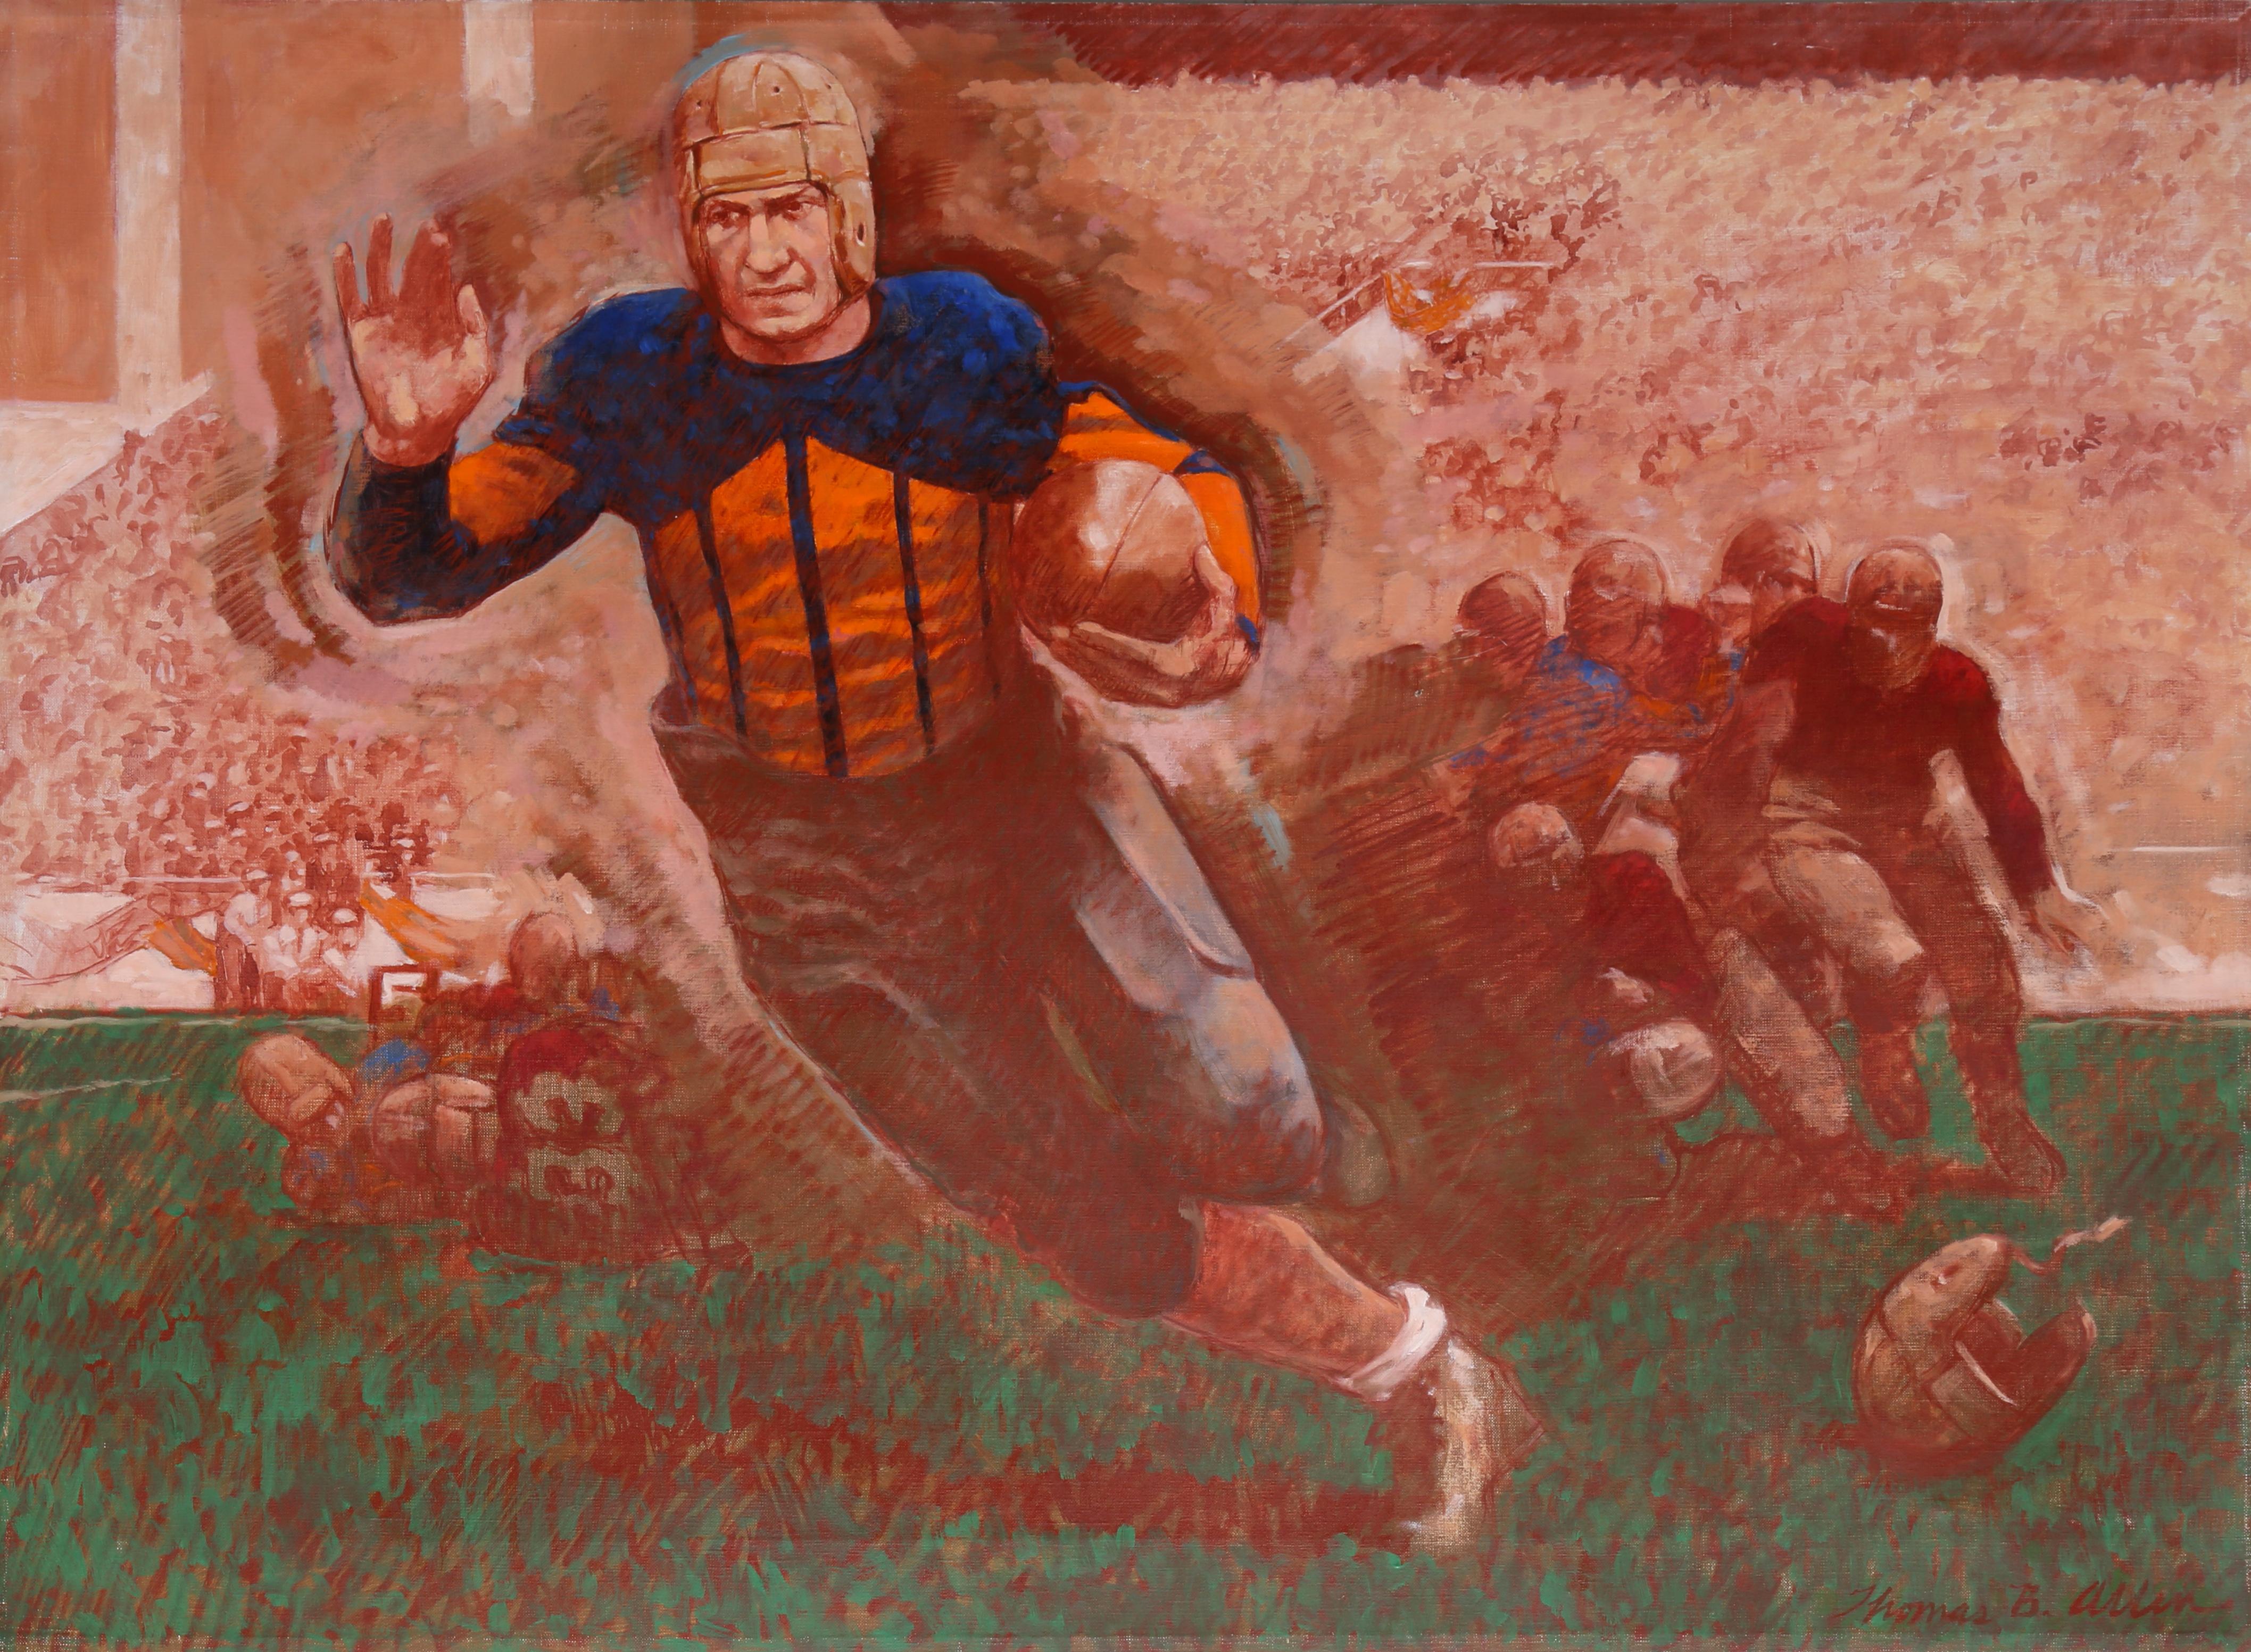 Thomas B. Allen Figurative Painting - Harold “Red” Grange, The Galloping Ghost, Football Painting by Thomas Allen